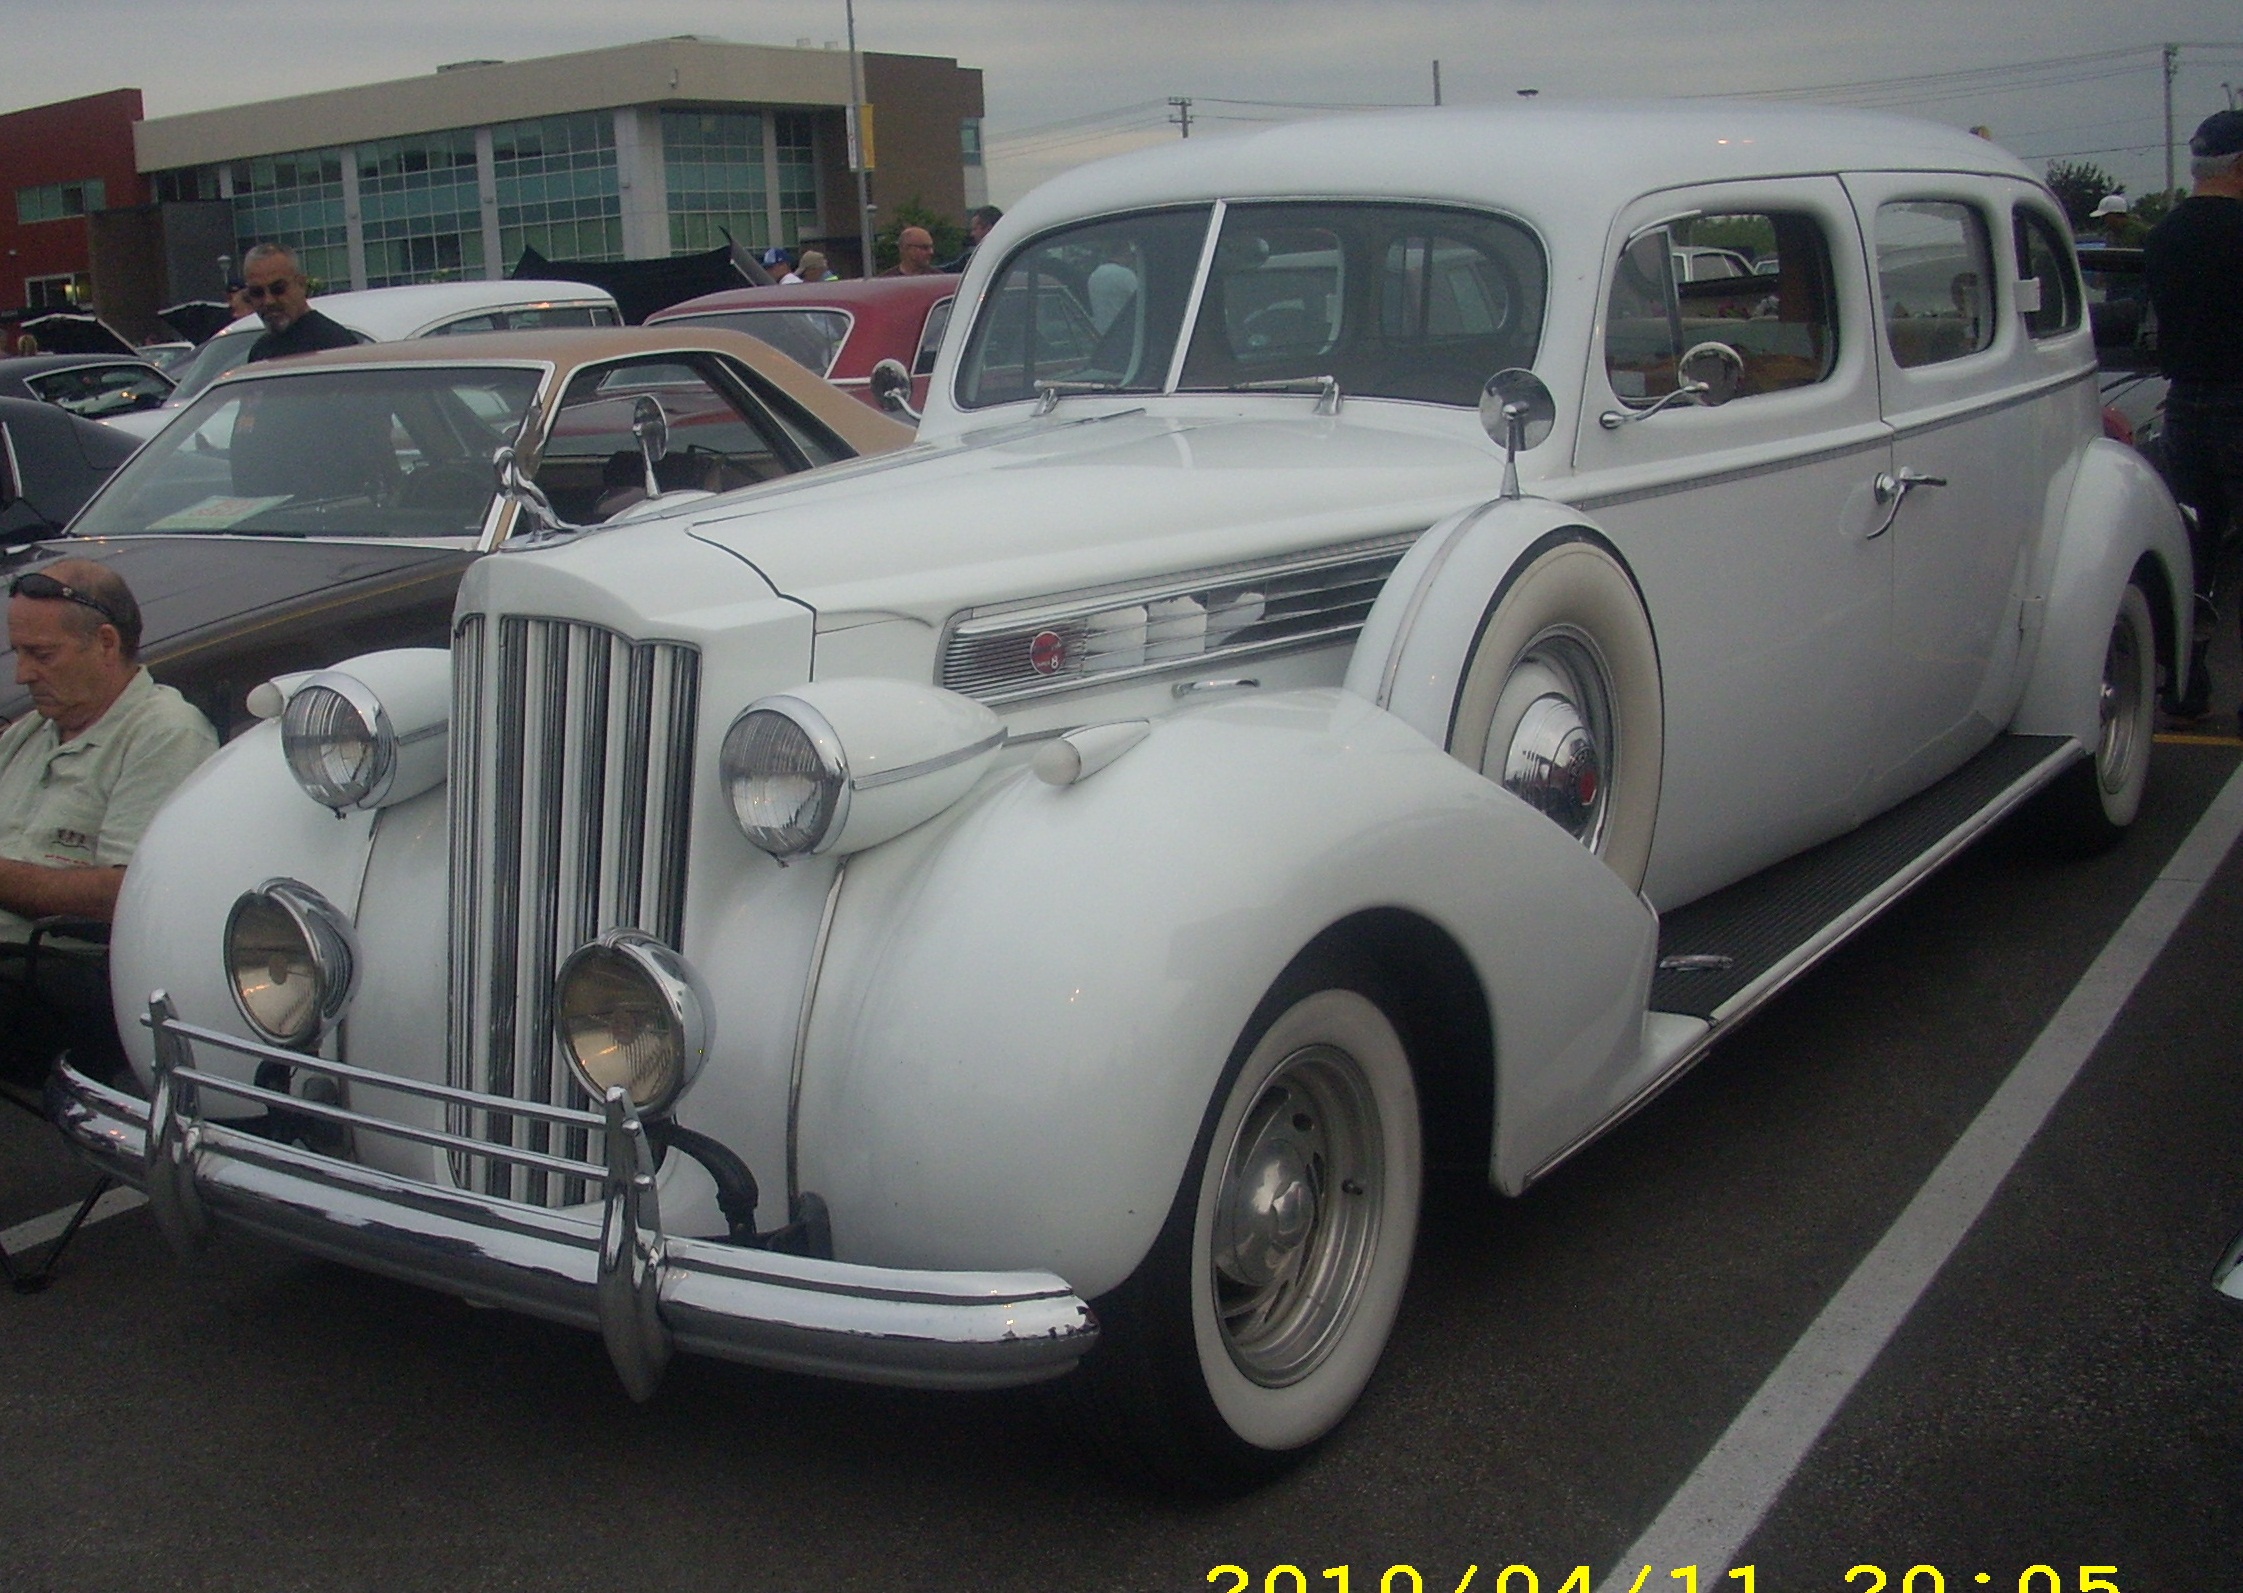 File:Packard Super 8 (Centropolis Laval '10).jpg - Wikimedia Commons